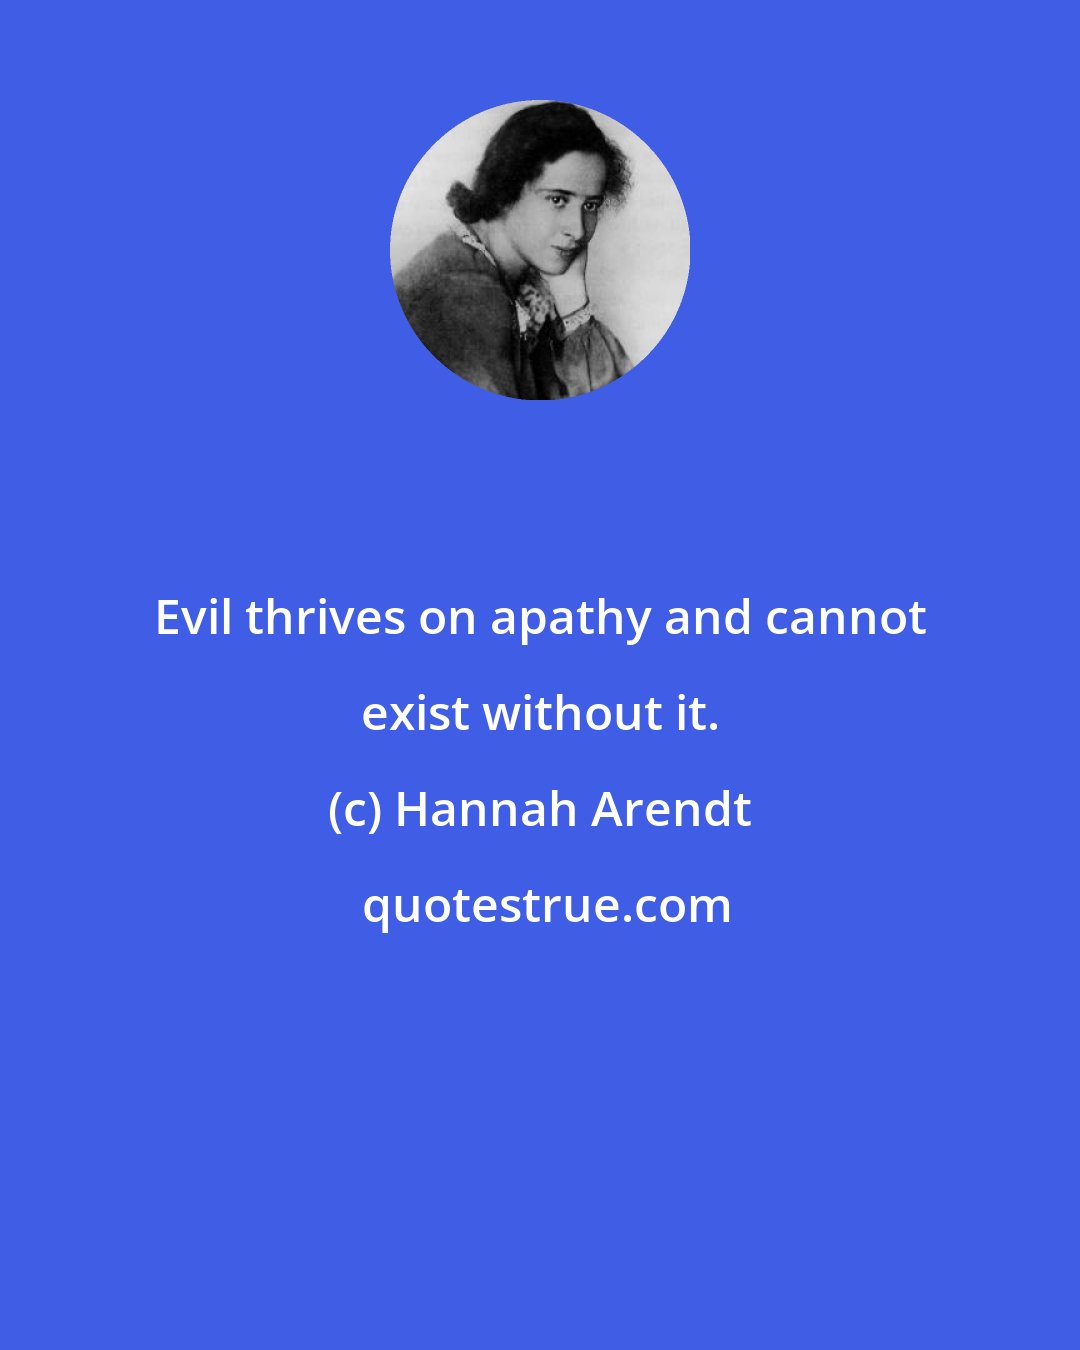 Hannah Arendt: Evil thrives on apathy and cannot exist without it.